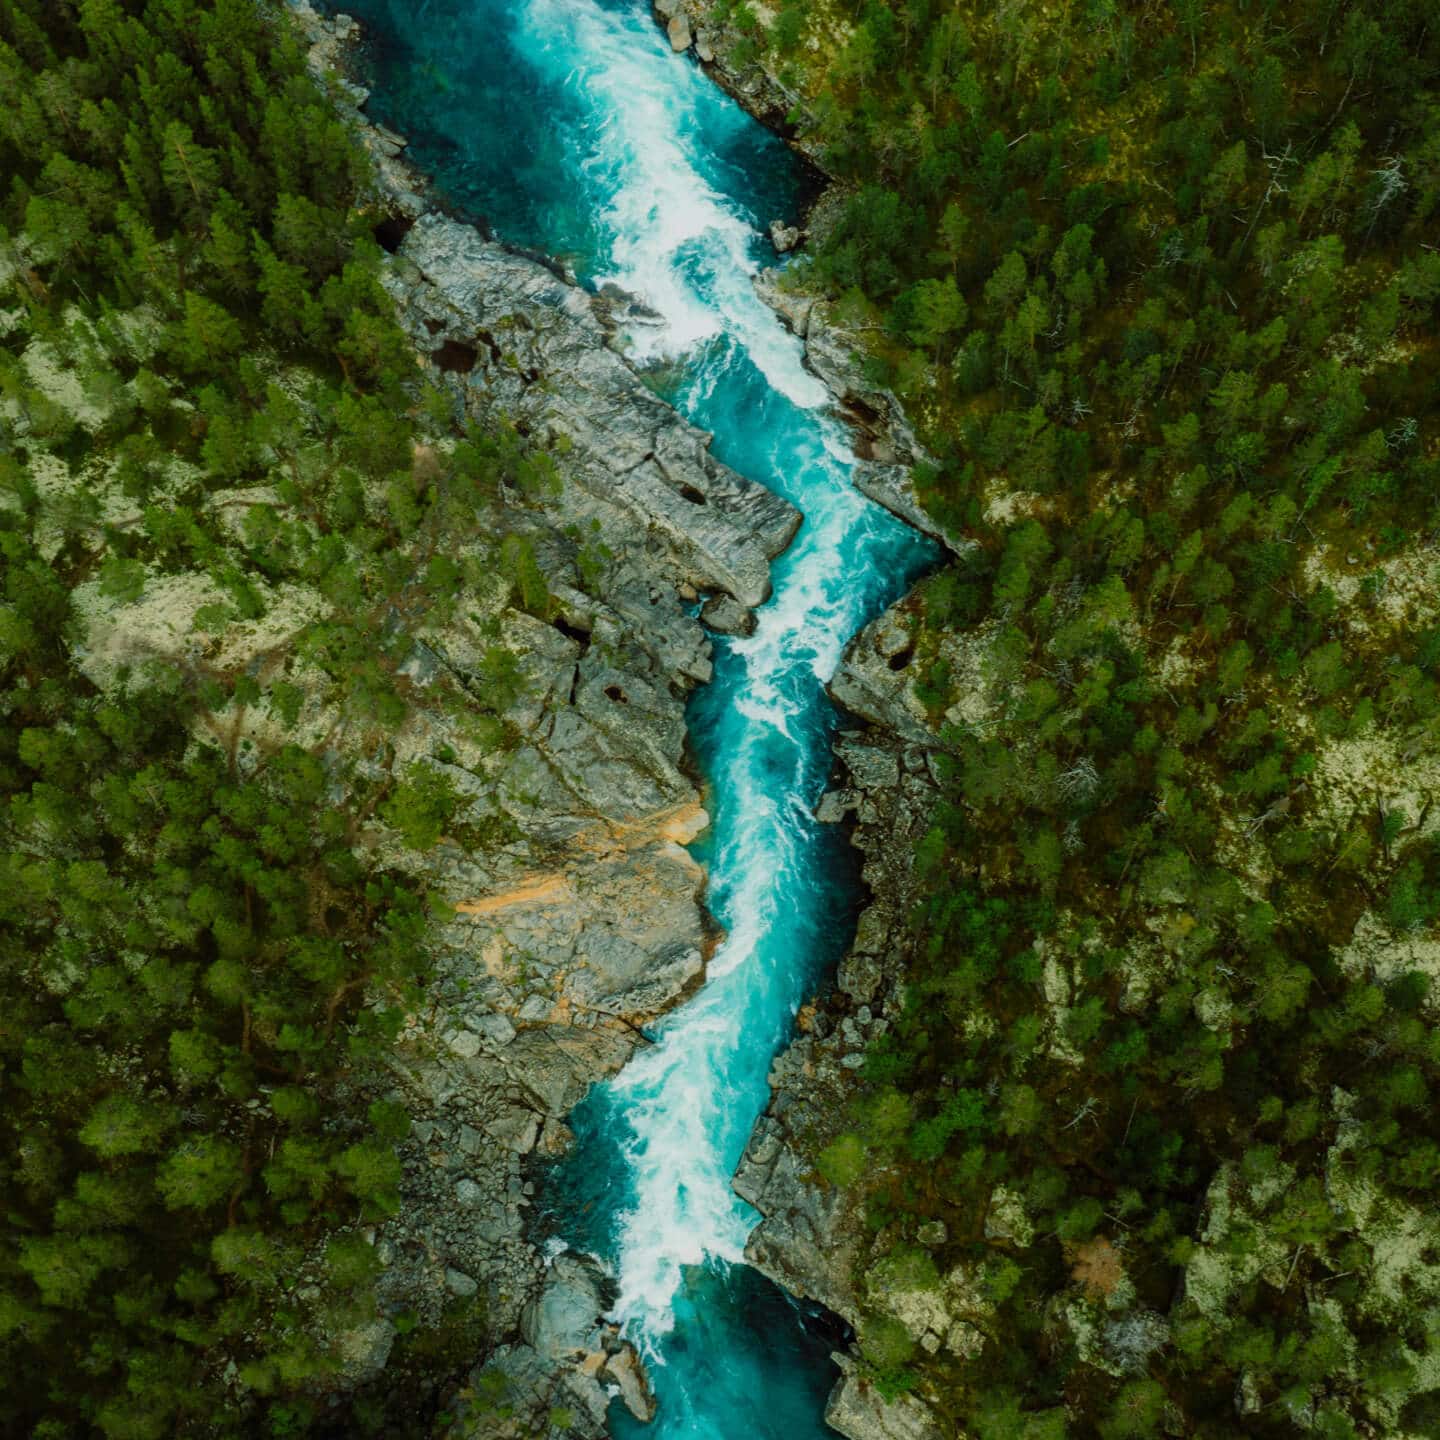 A bird's eye view of a mountain river in the forest